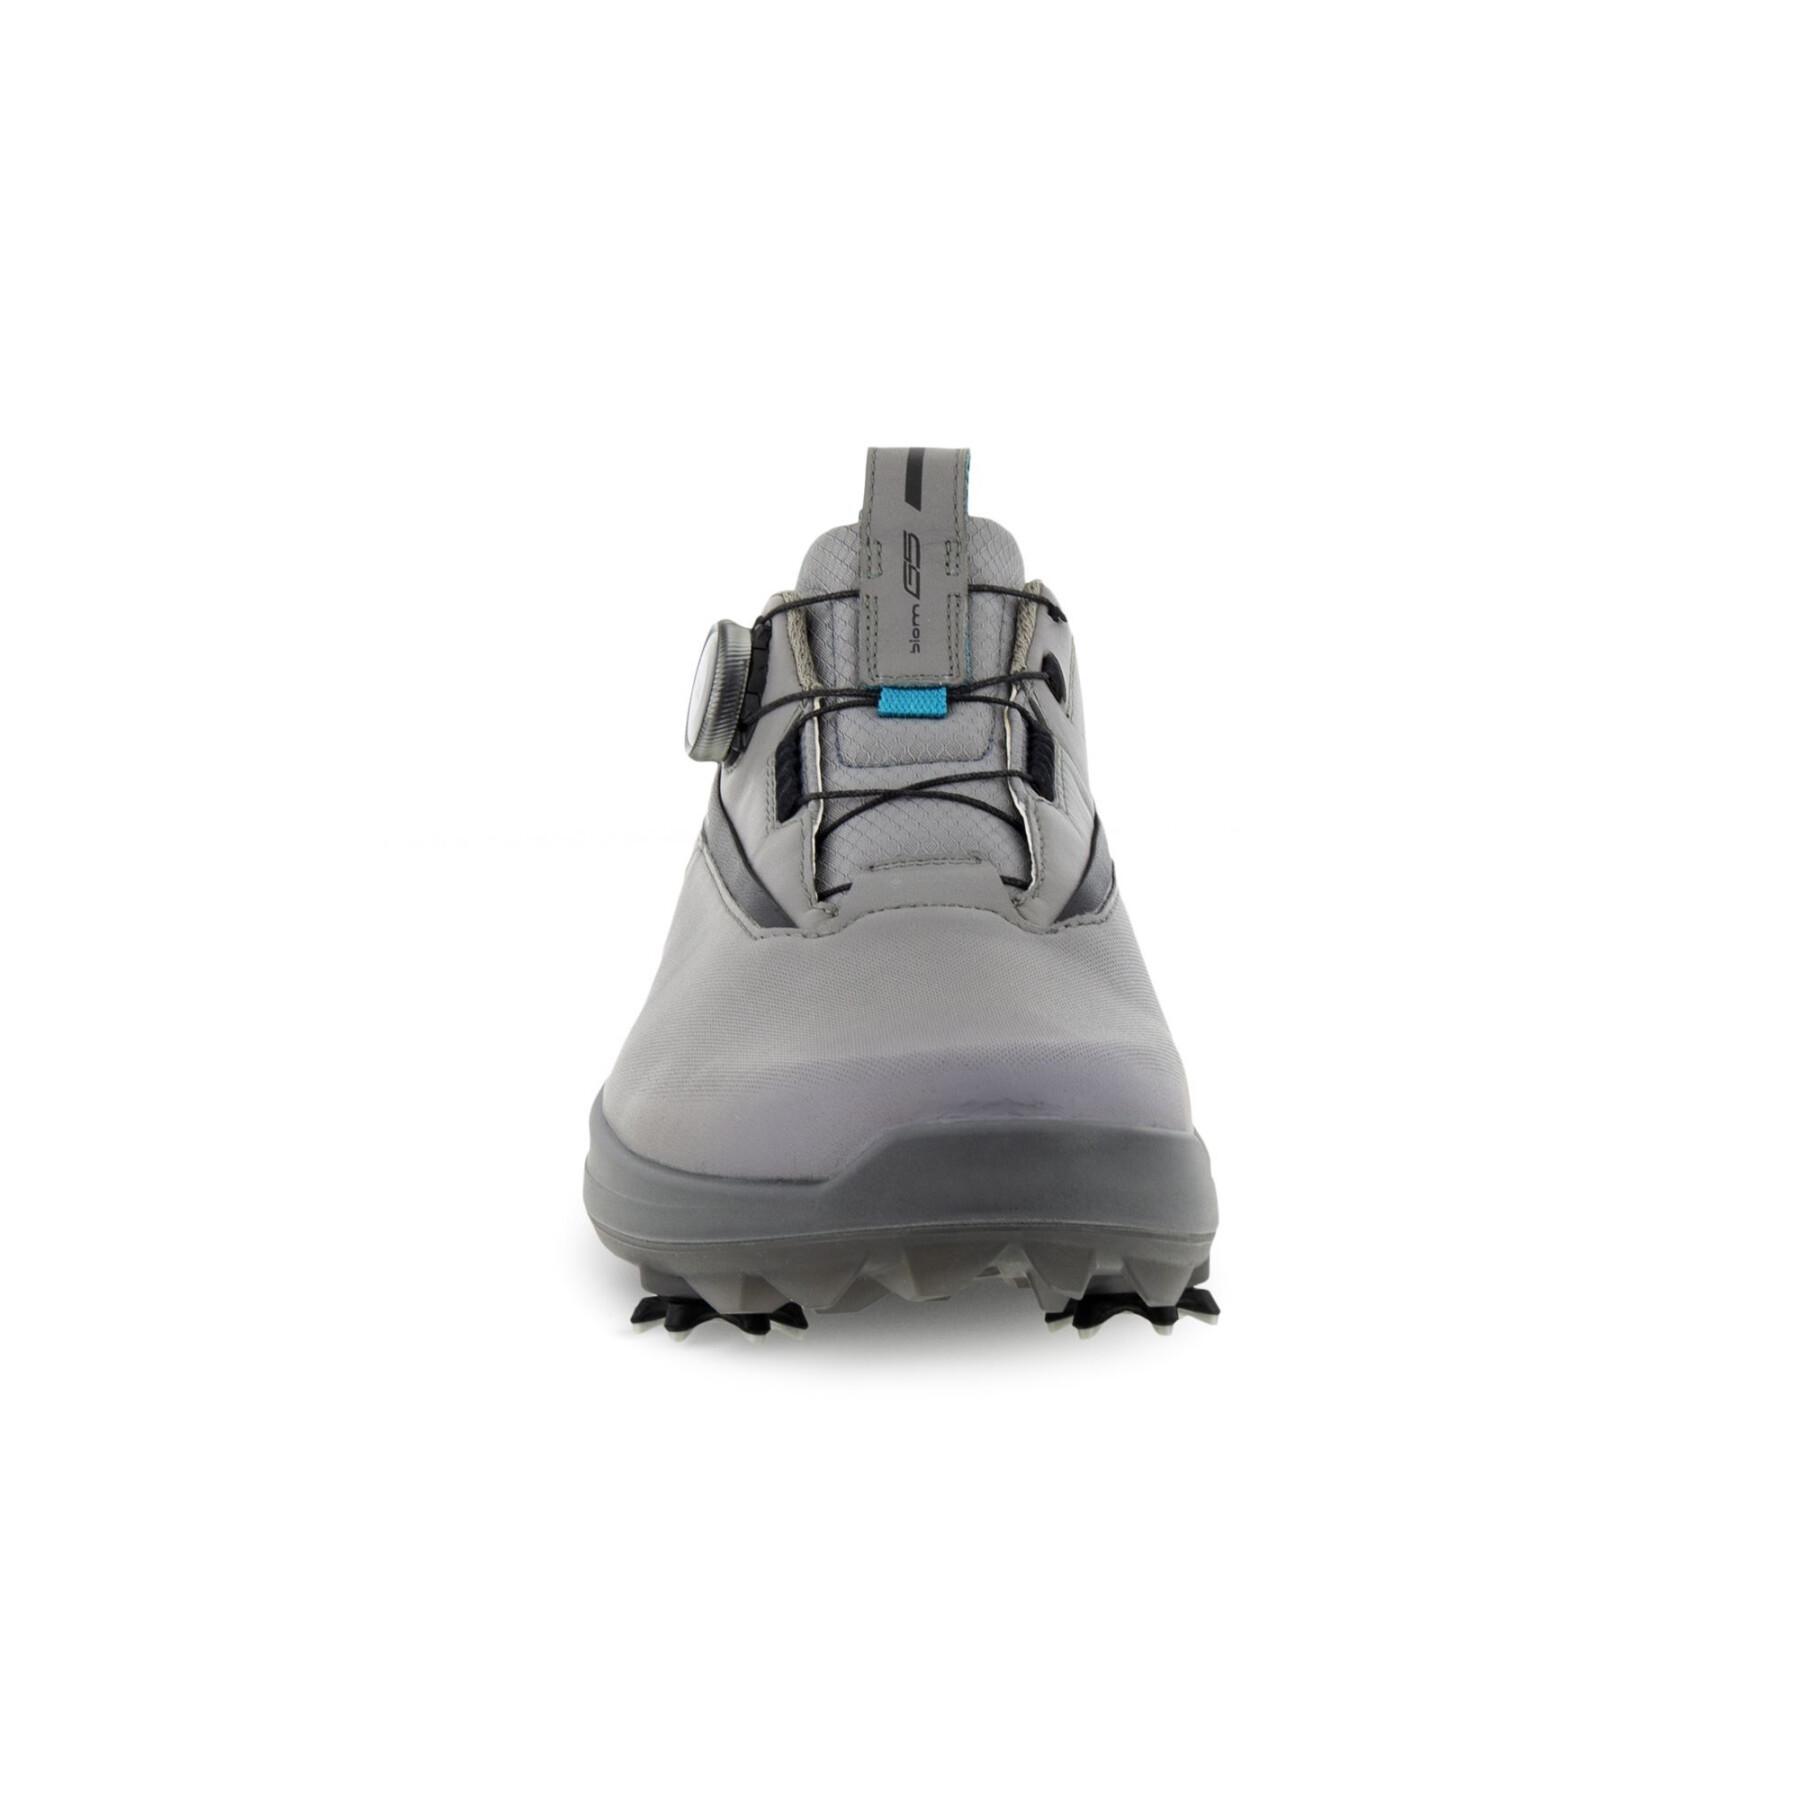 Golf shoes with spikes Ecco Biom G5 Boa